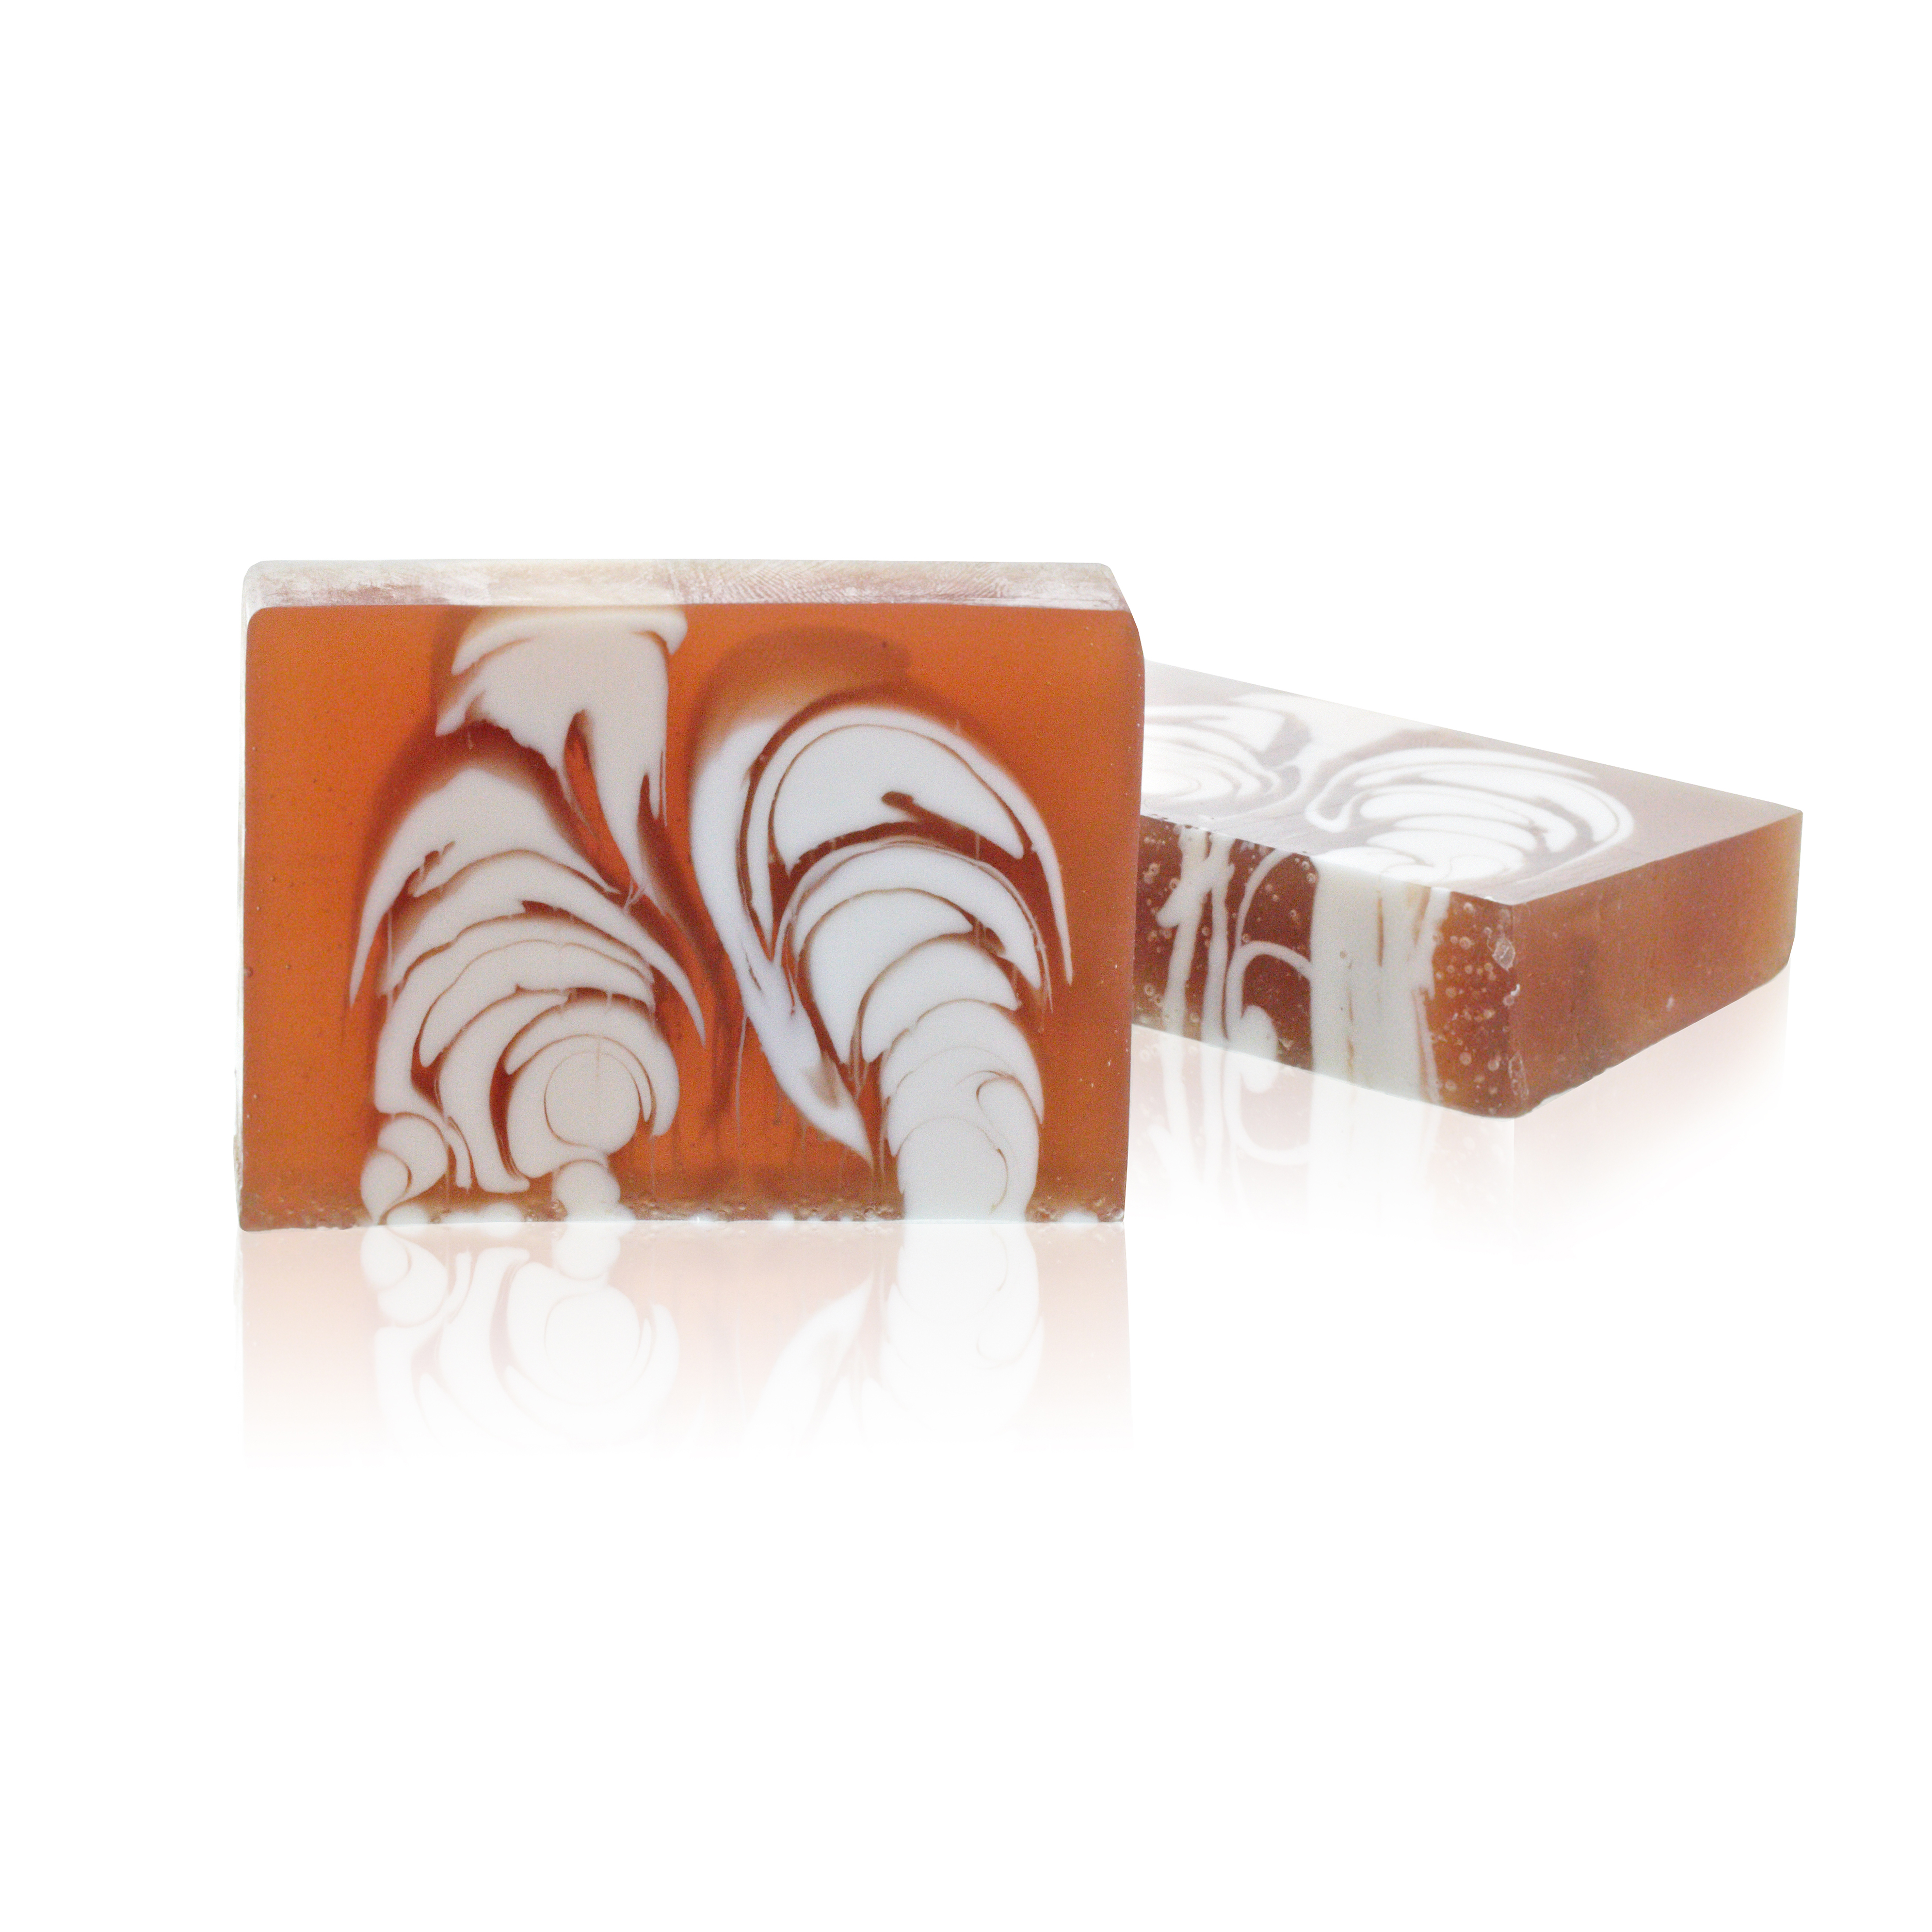 Handcrafted Soap Slice100gAlmond